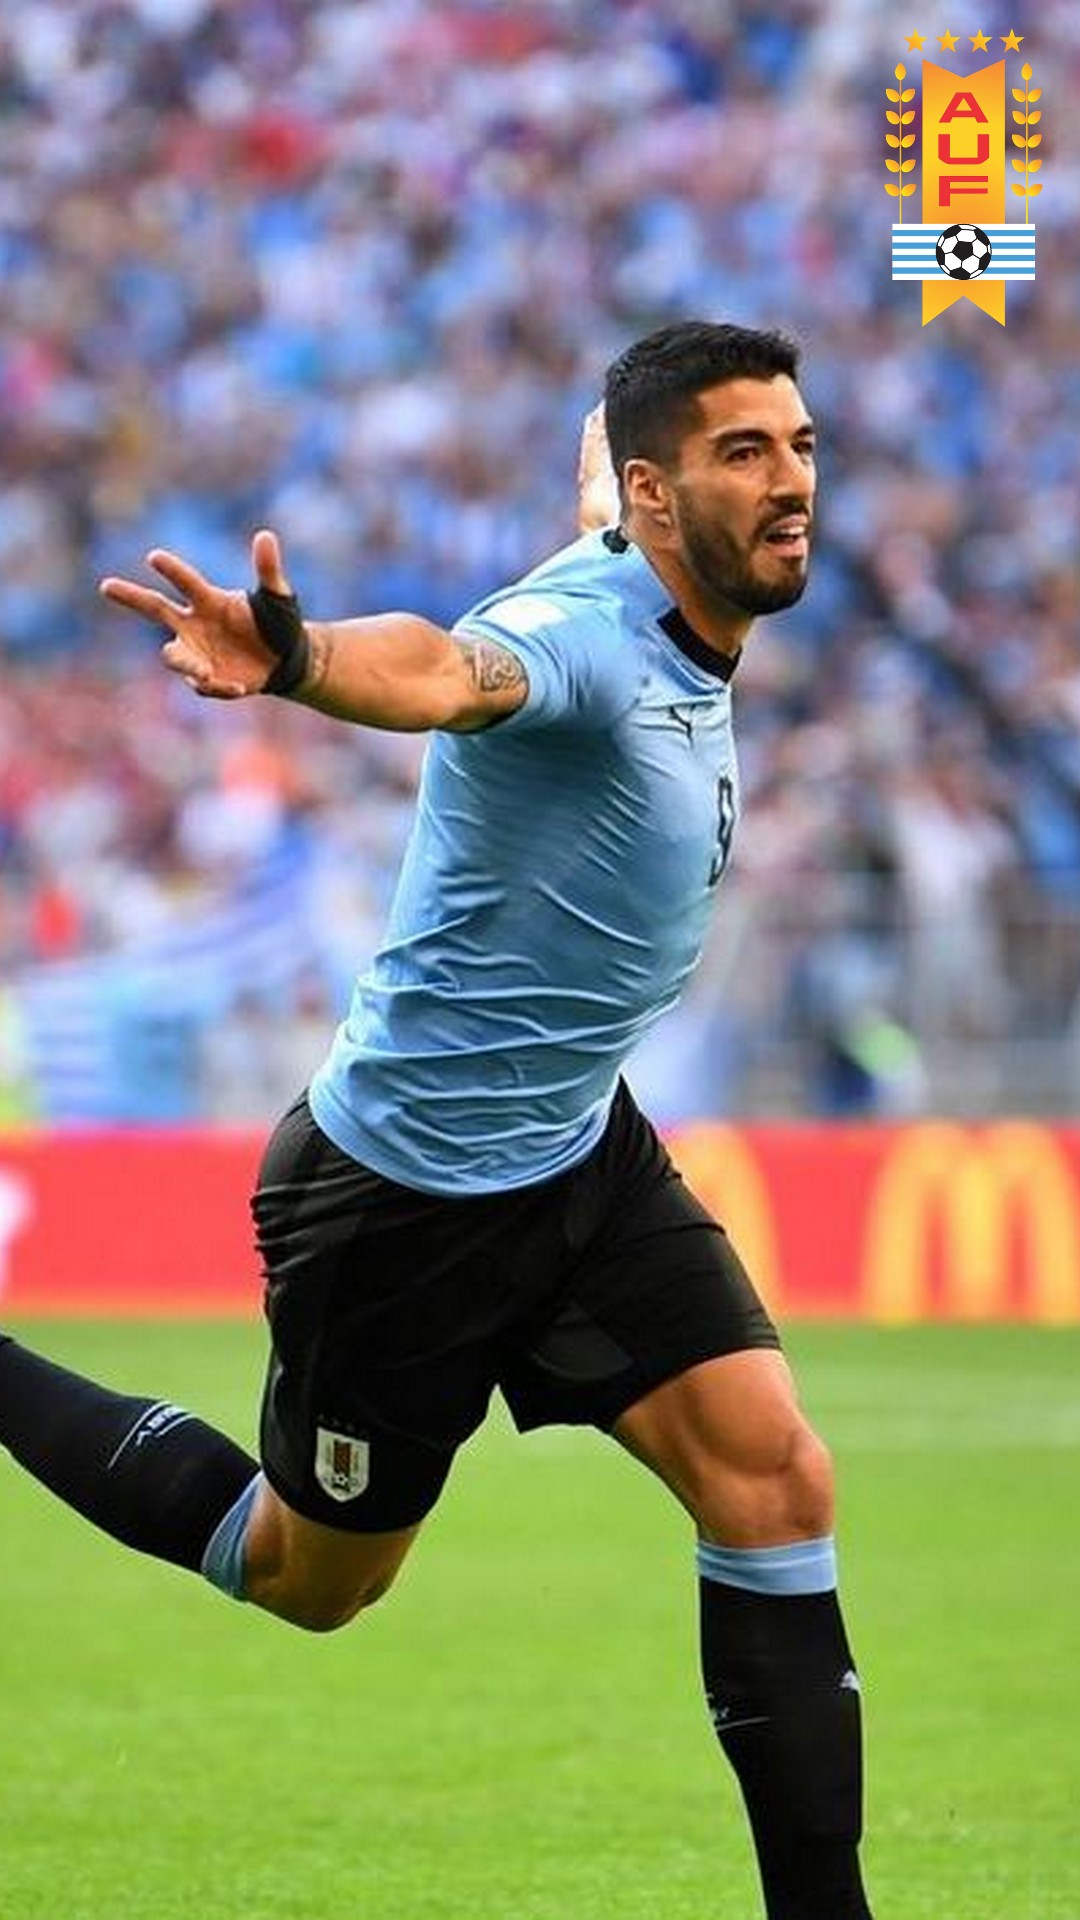 Luis Suarez Uruguay Wallpaper iPhone HD With Resolution 1080X1920 pixel. You can make this wallpaper for your Mac or Windows Desktop Background, iPhone, Android or Tablet and another Smartphone device for free